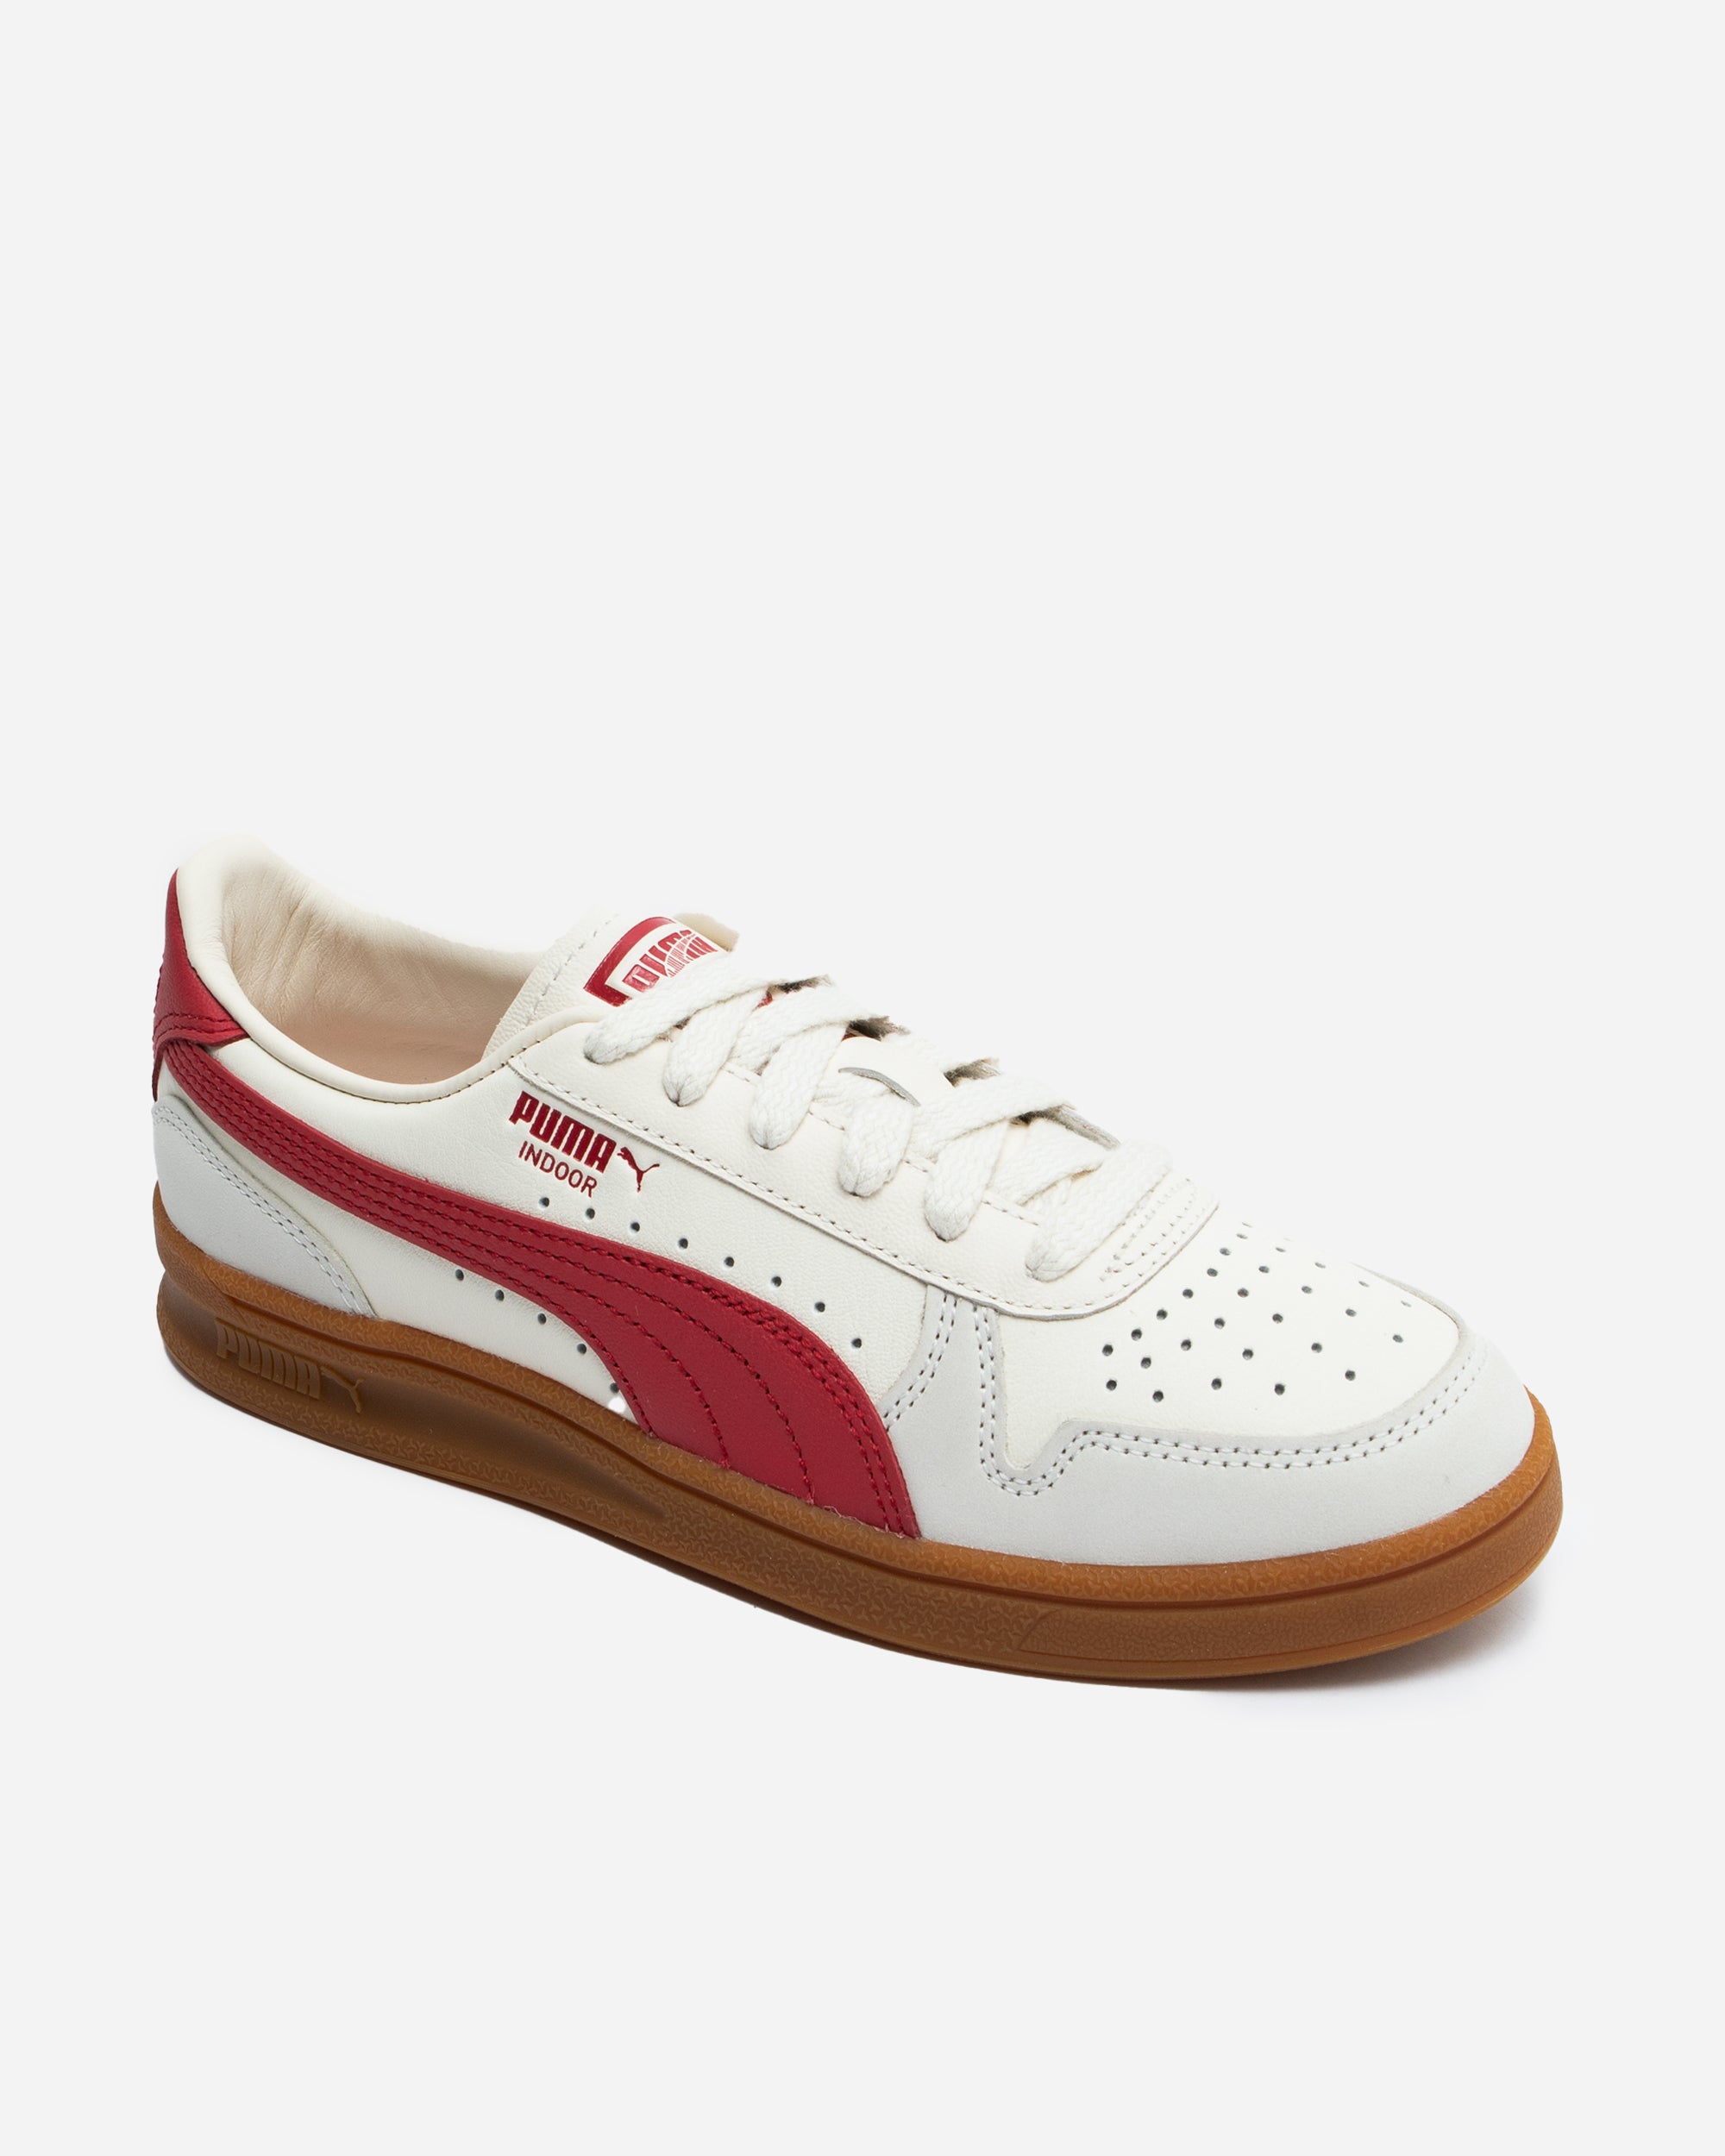 Puma Indoor OG Frosted Ivory-Club Red 395363-001